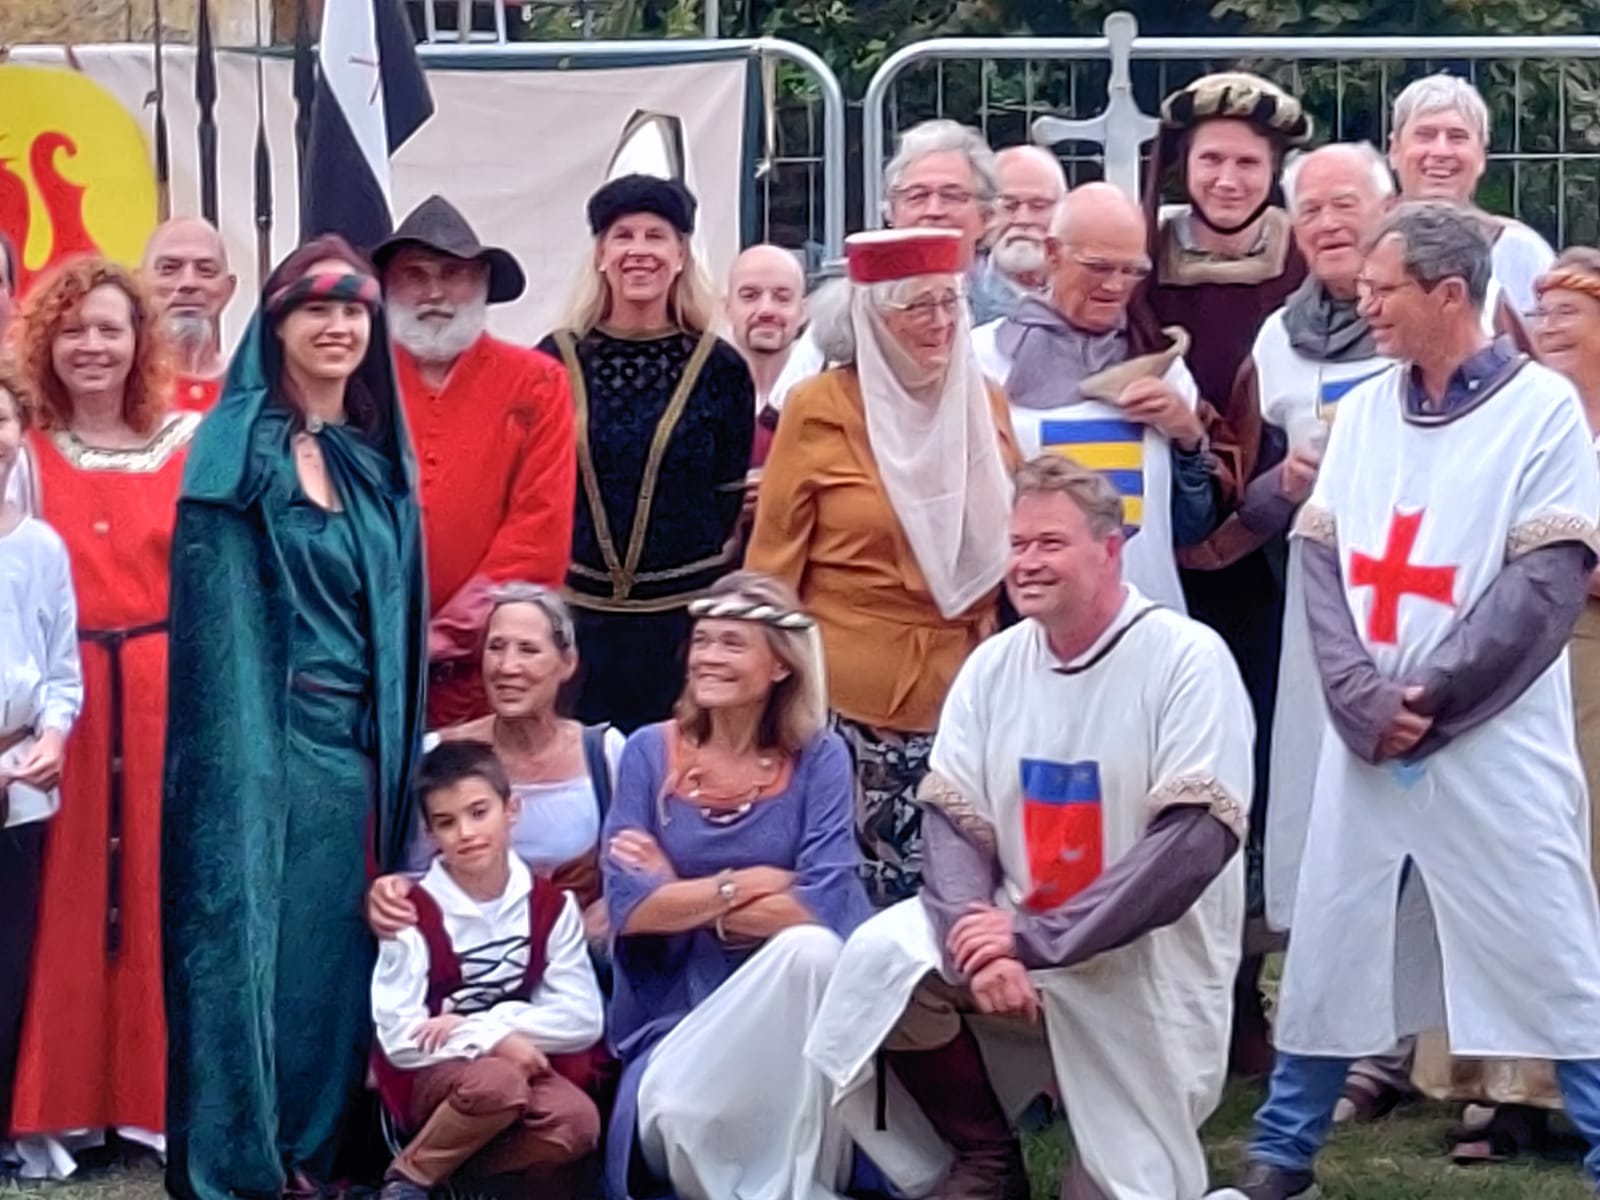 Medieval festival at the castle